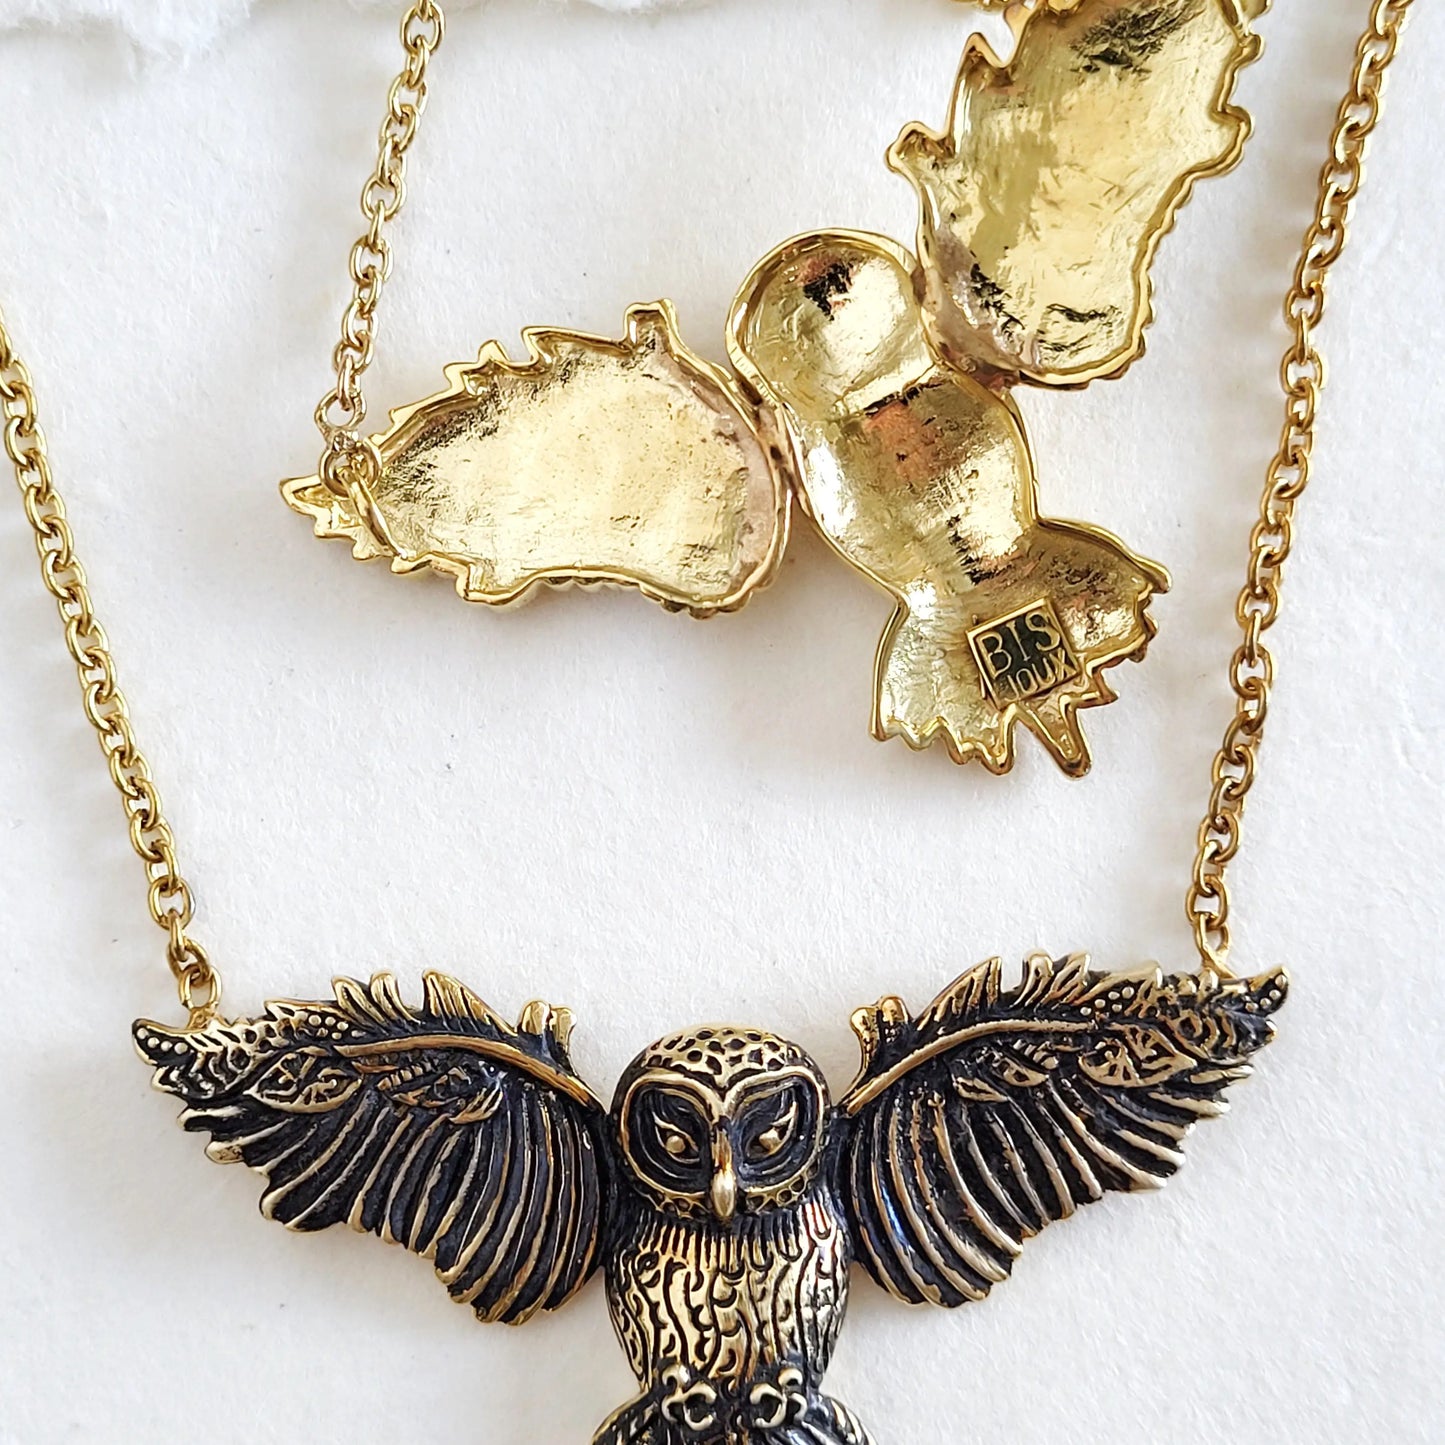 Aged Finished Brass Owl Necklace - Moon Room Shop and Wellness